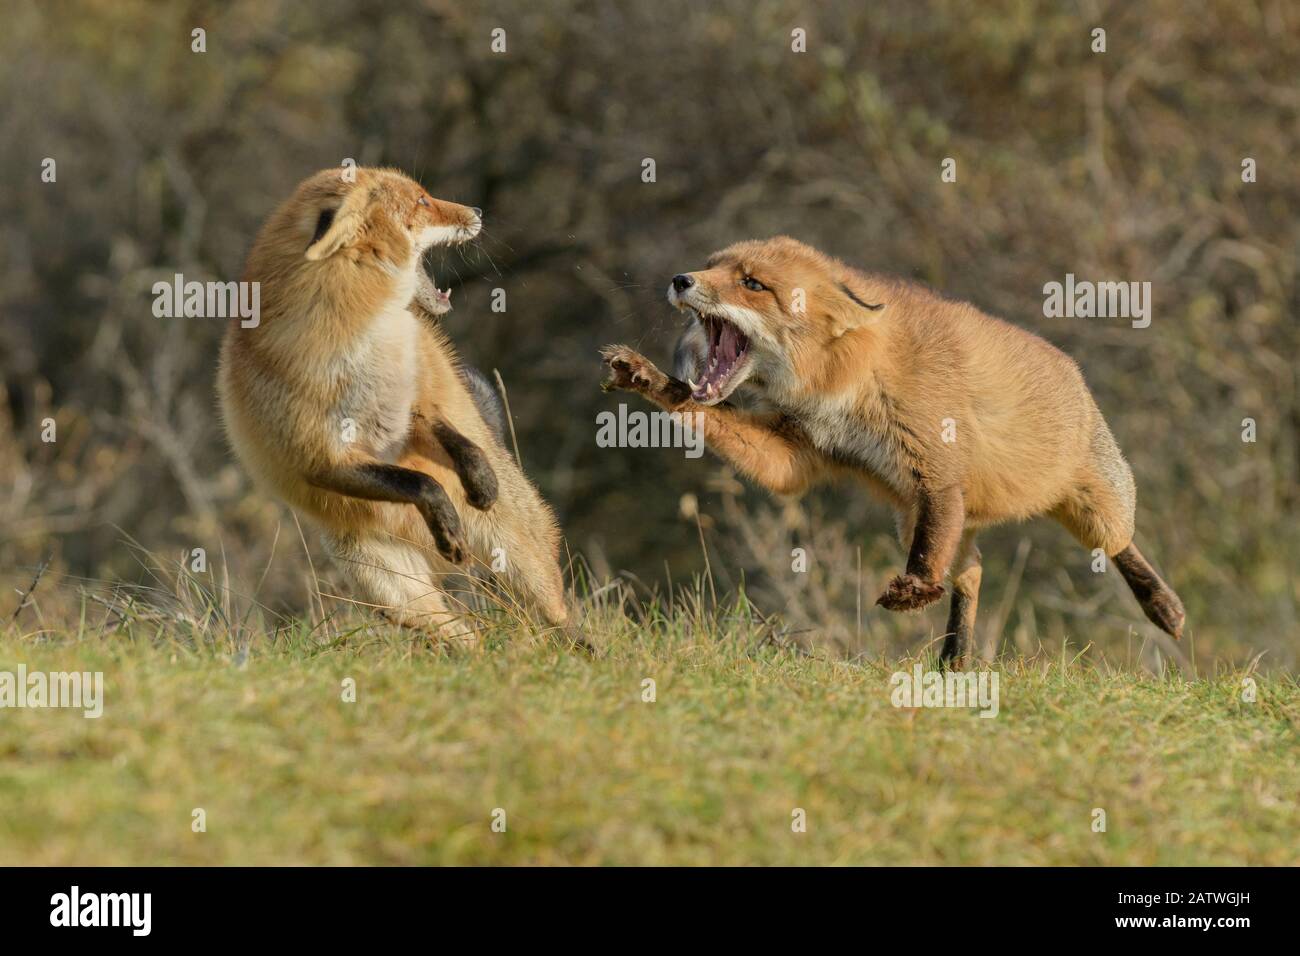 Red foxes (Vulpes vulpes) fighting in sand dune habitat, Holland, Netherlands. November. Stock Photo